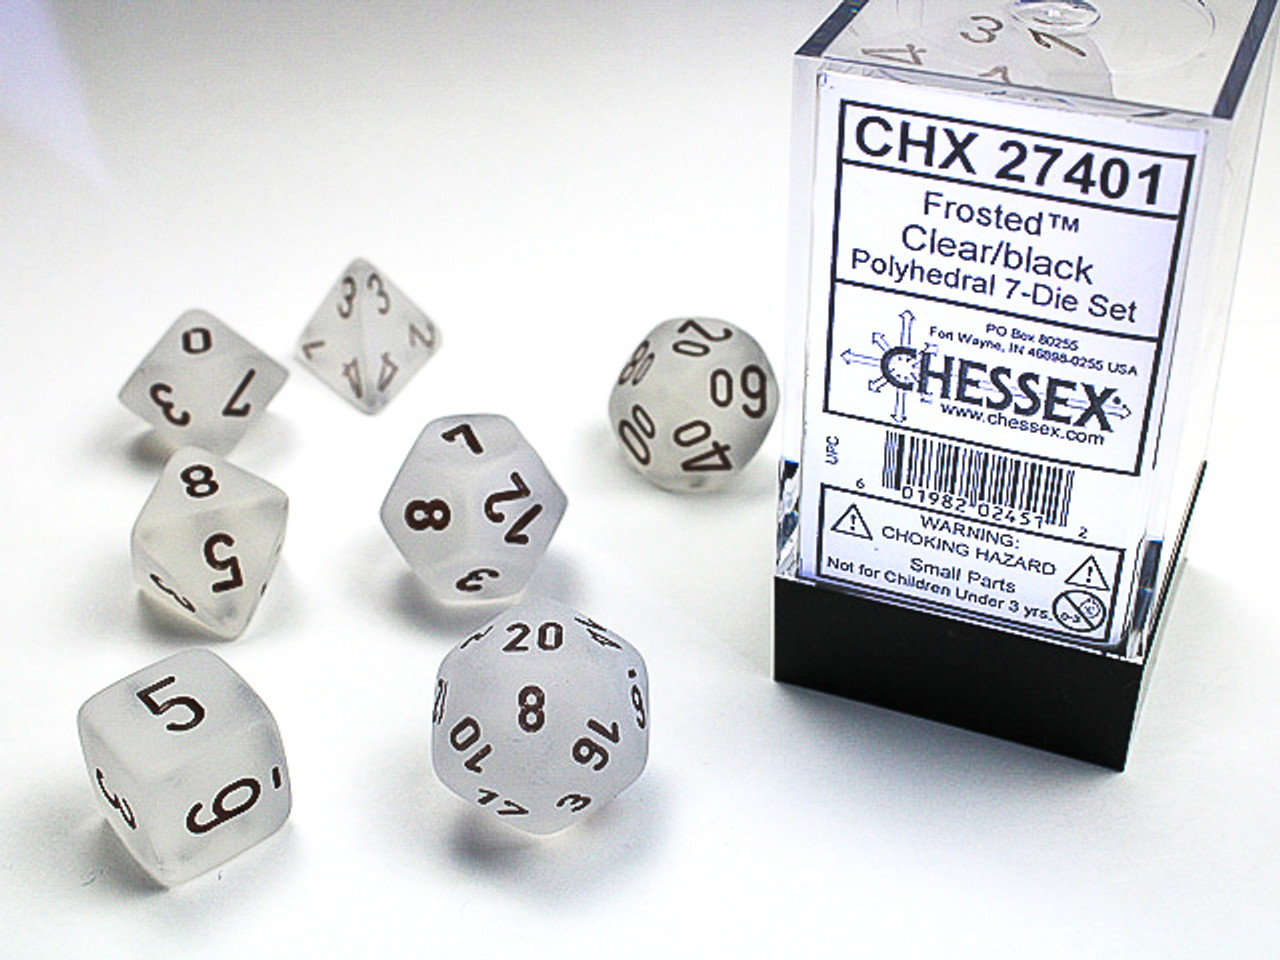 27401 - Frosted™ Polyhedral Clear/black 7-Die Set